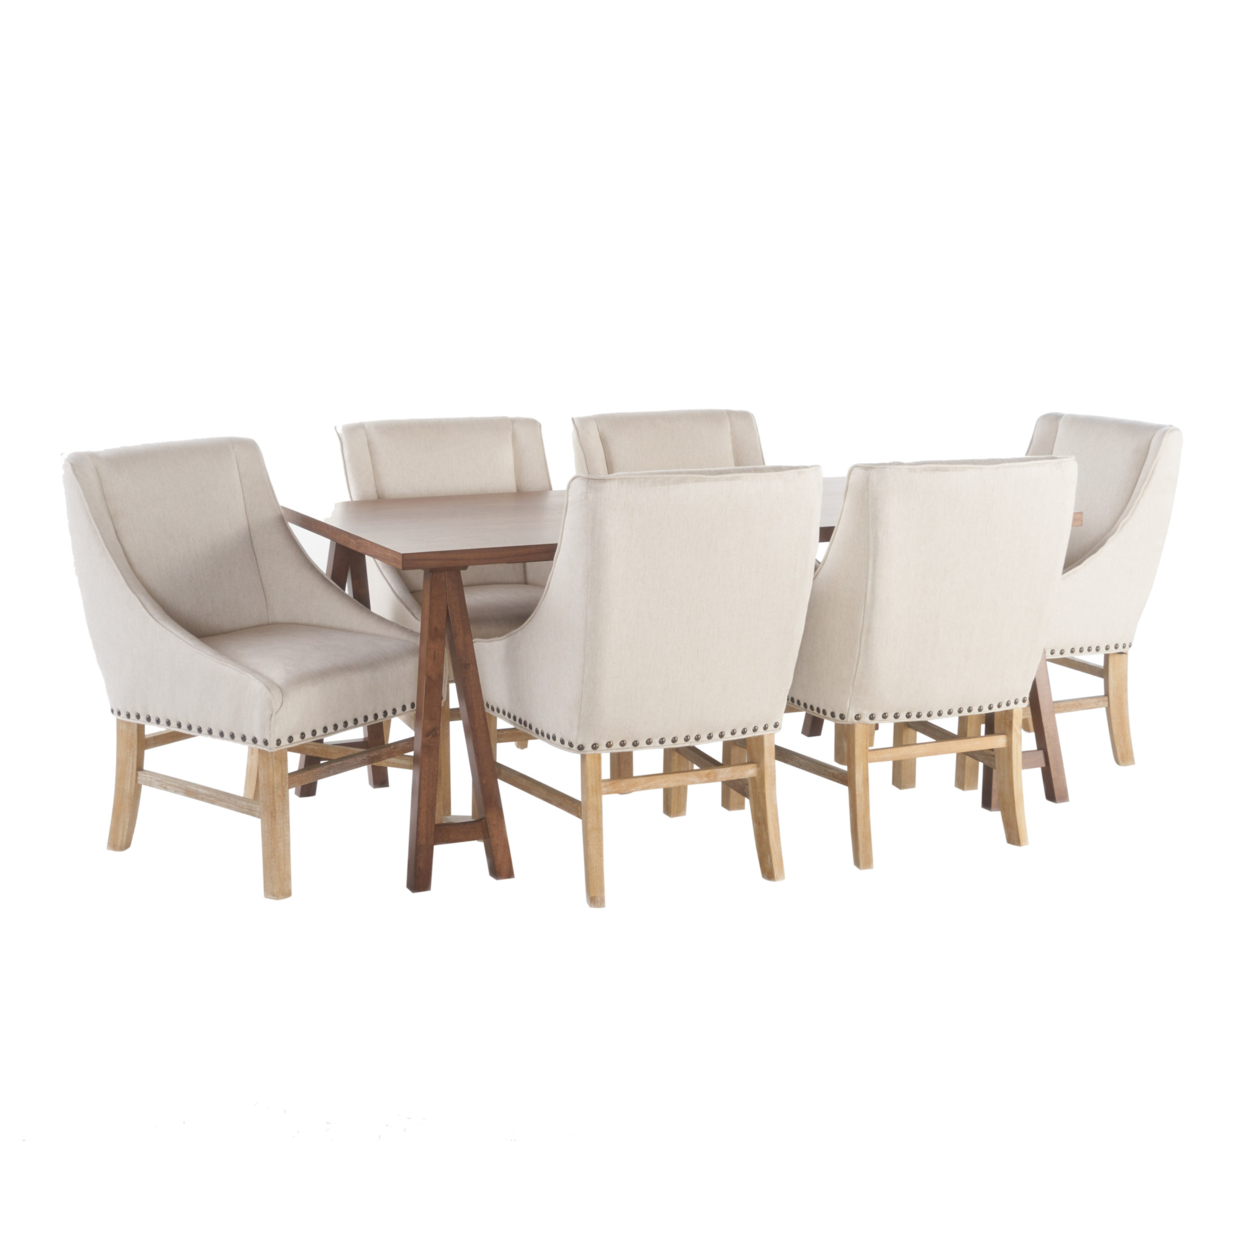 Sabrina Farmhouse 7 Piece Natural Walnut Dining Set With Linen Chairs